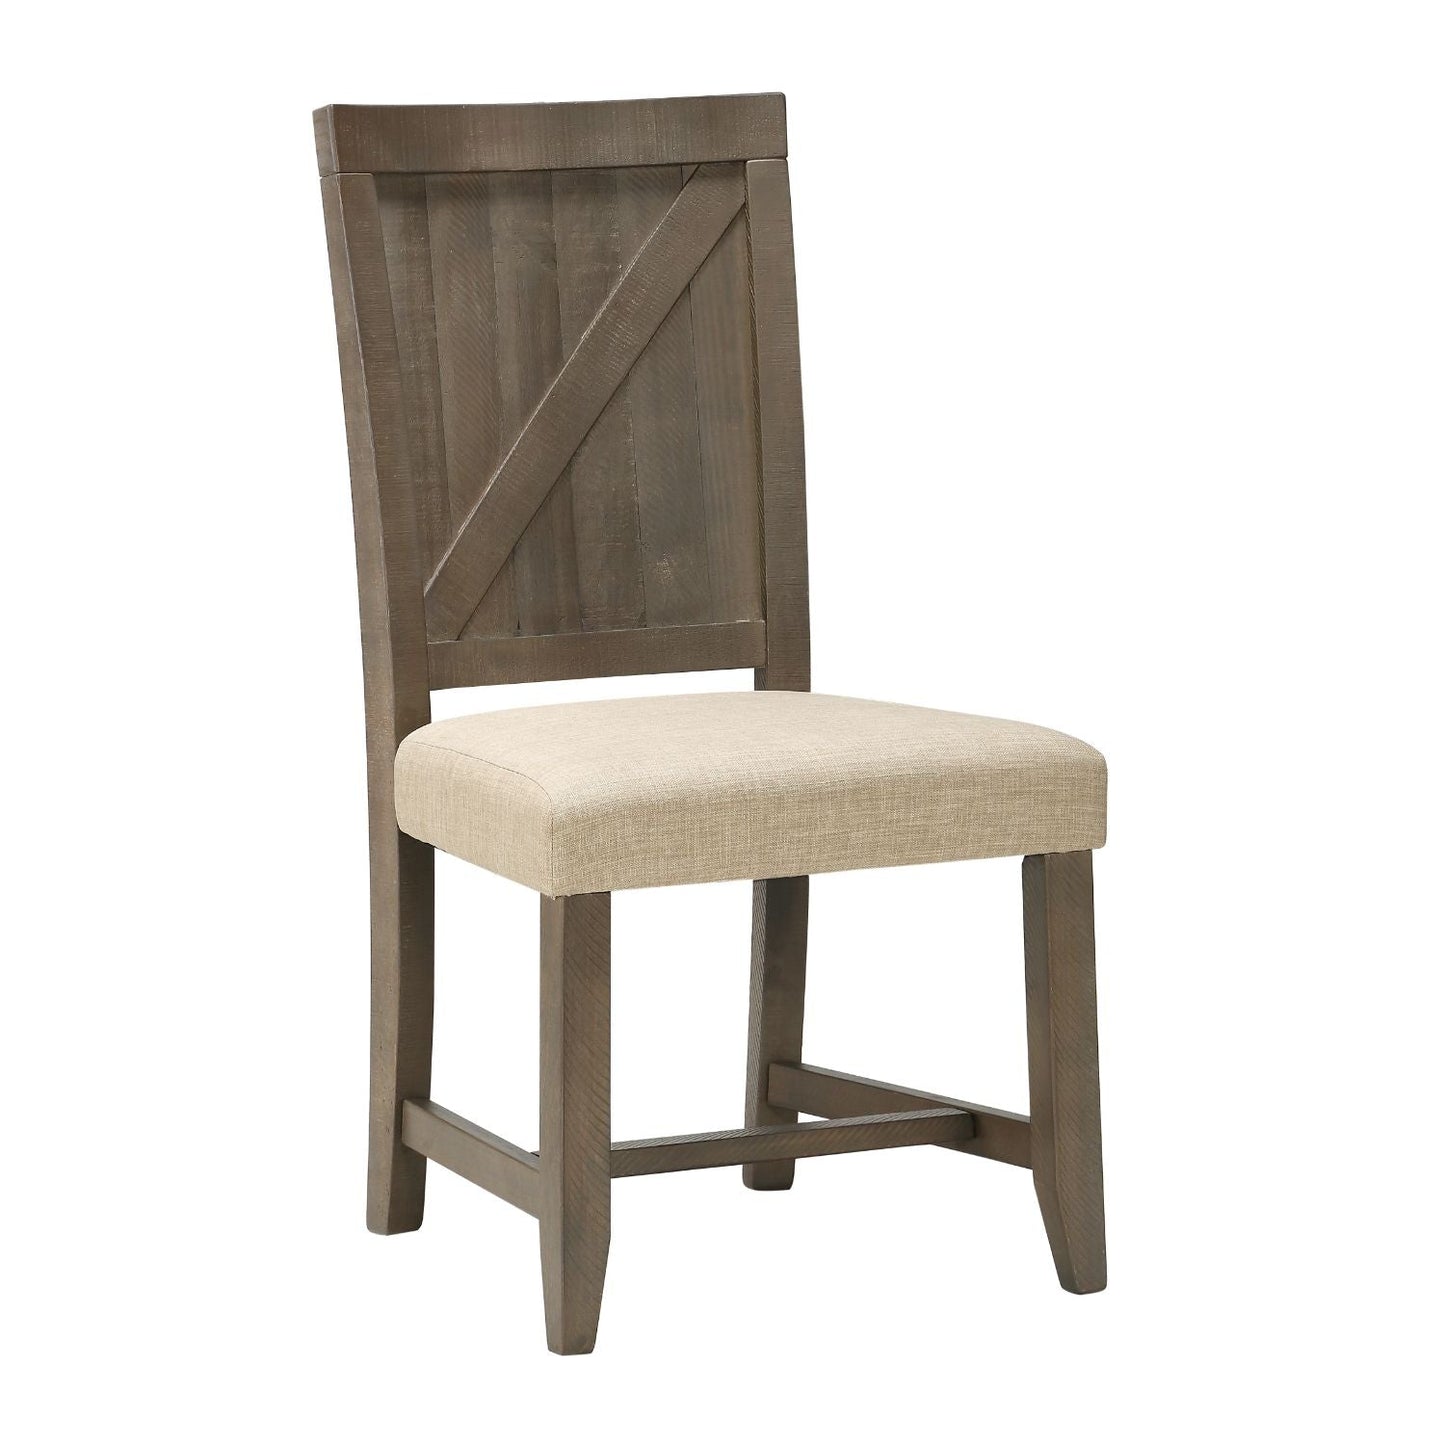 Modus Taryn 4PC Rectangle Dining Set w Wood Chair in Rustic Grey